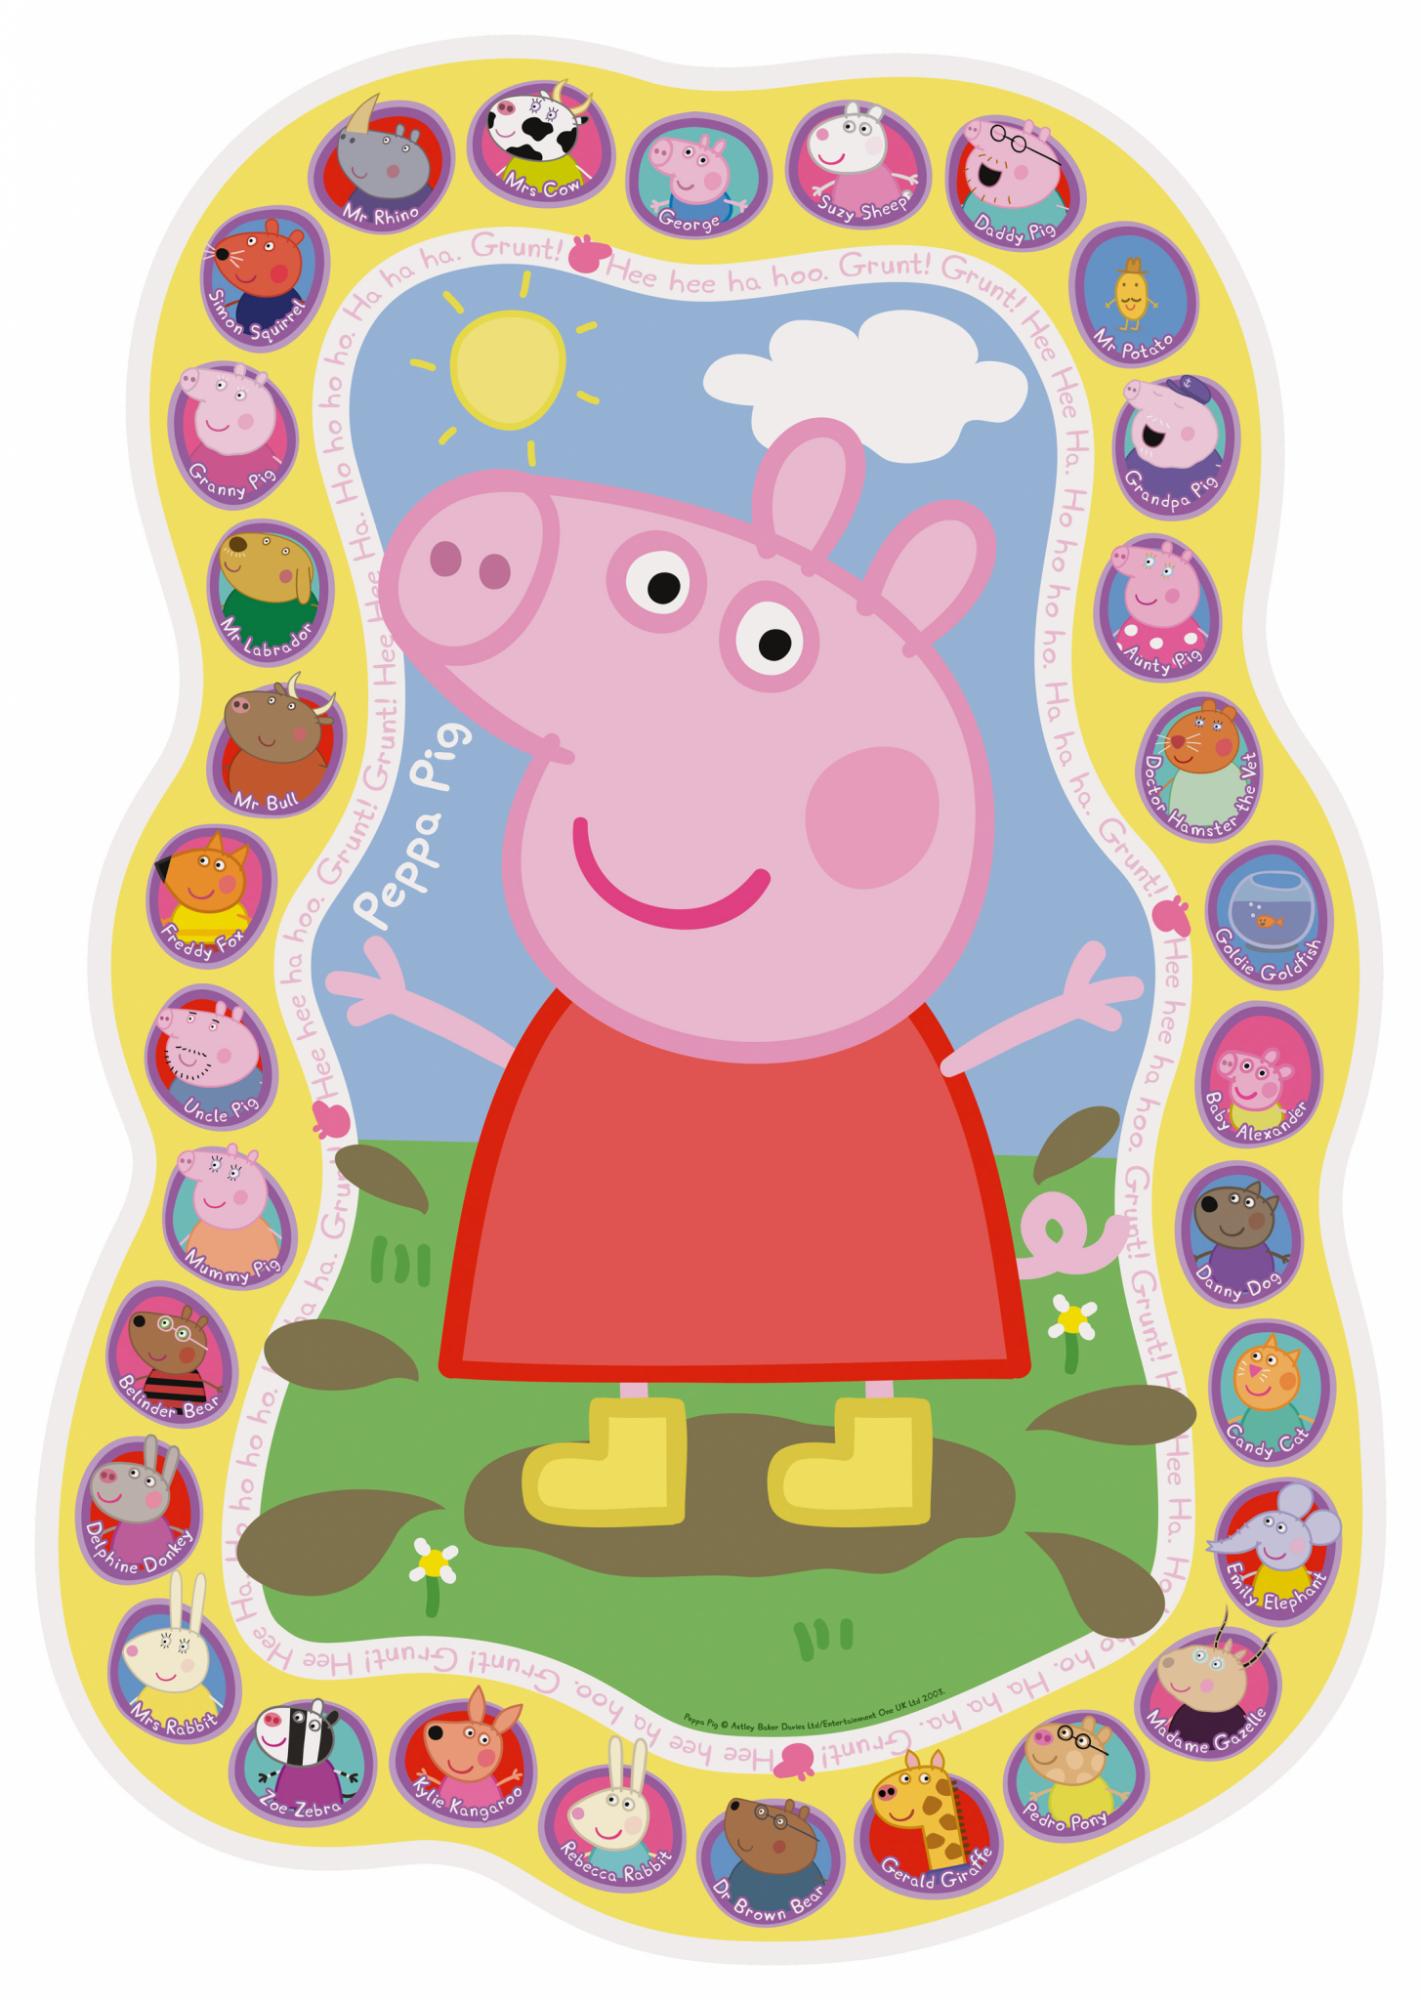 Ravensburger Peppa Pig - 24 Giant Floor Jigsaw Puzzle Pieces